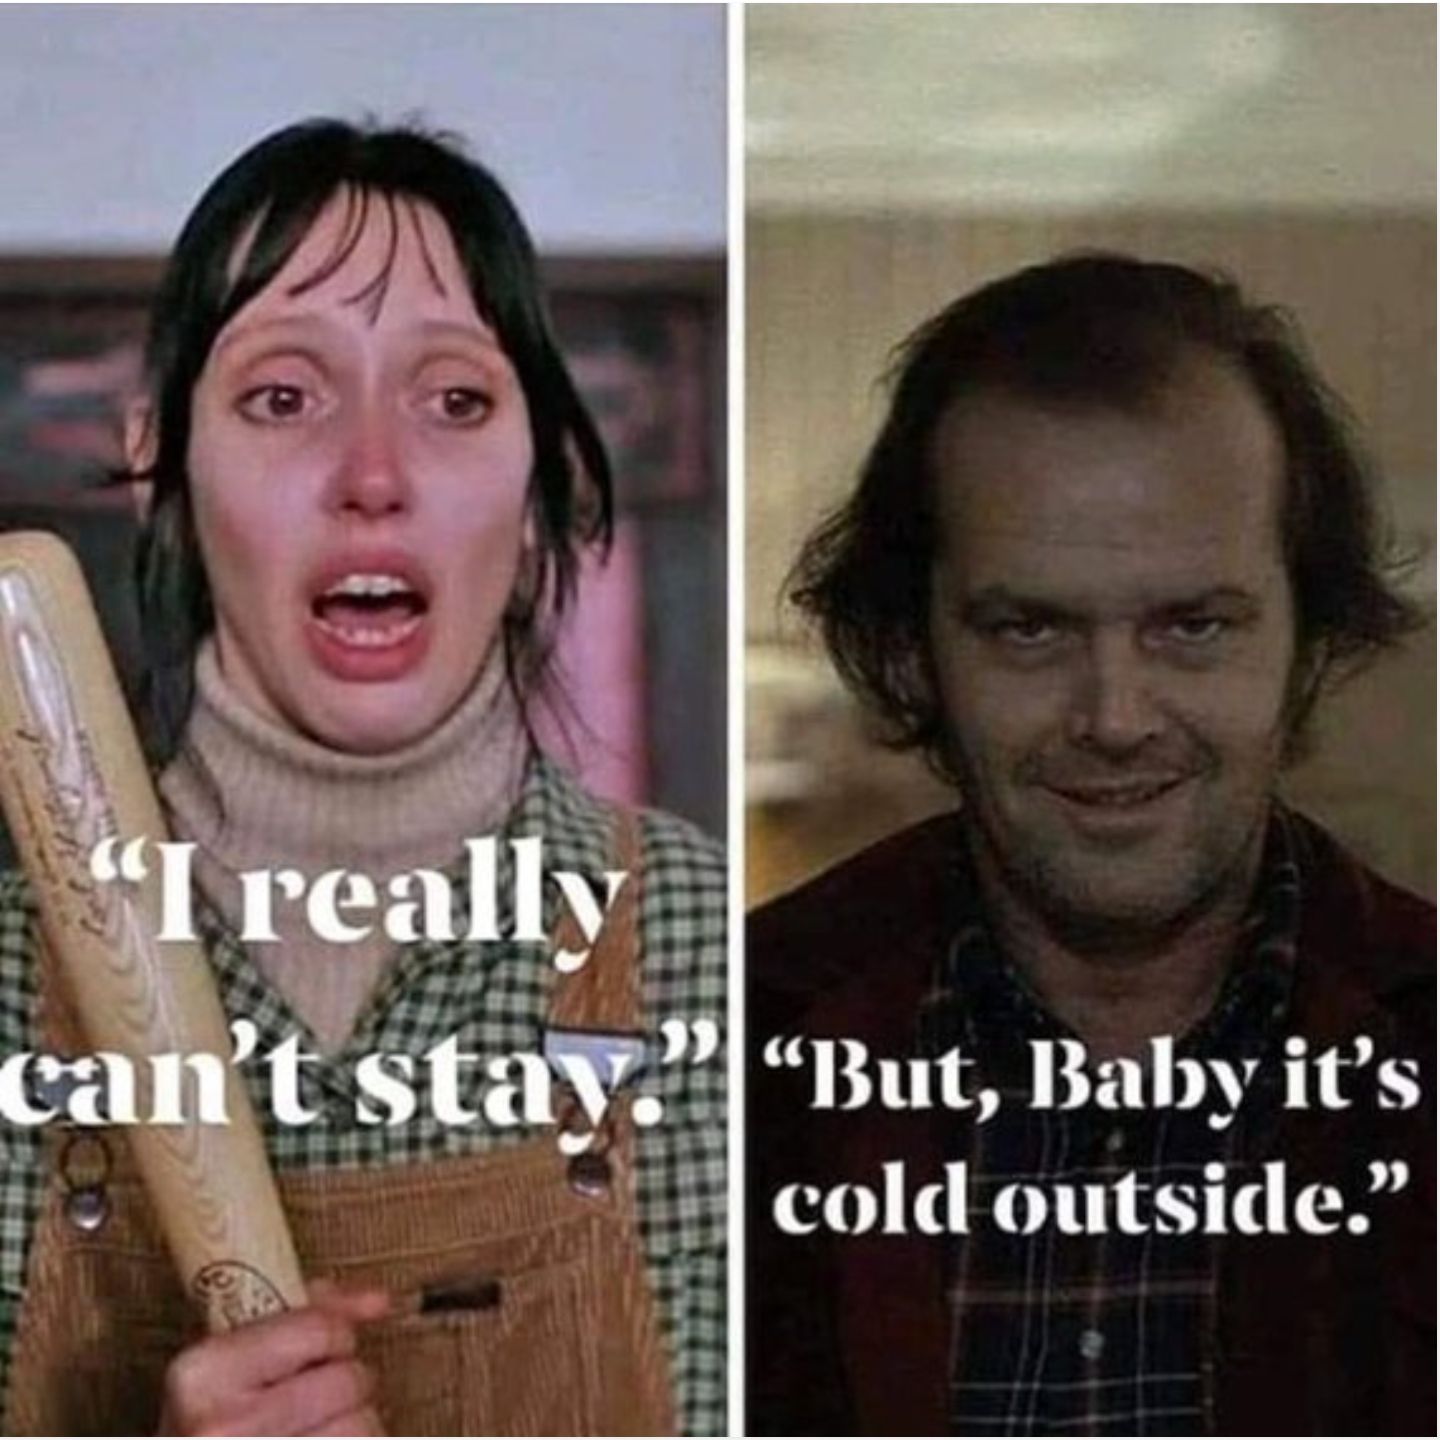 Meme about Jack going insane in The Shining. 